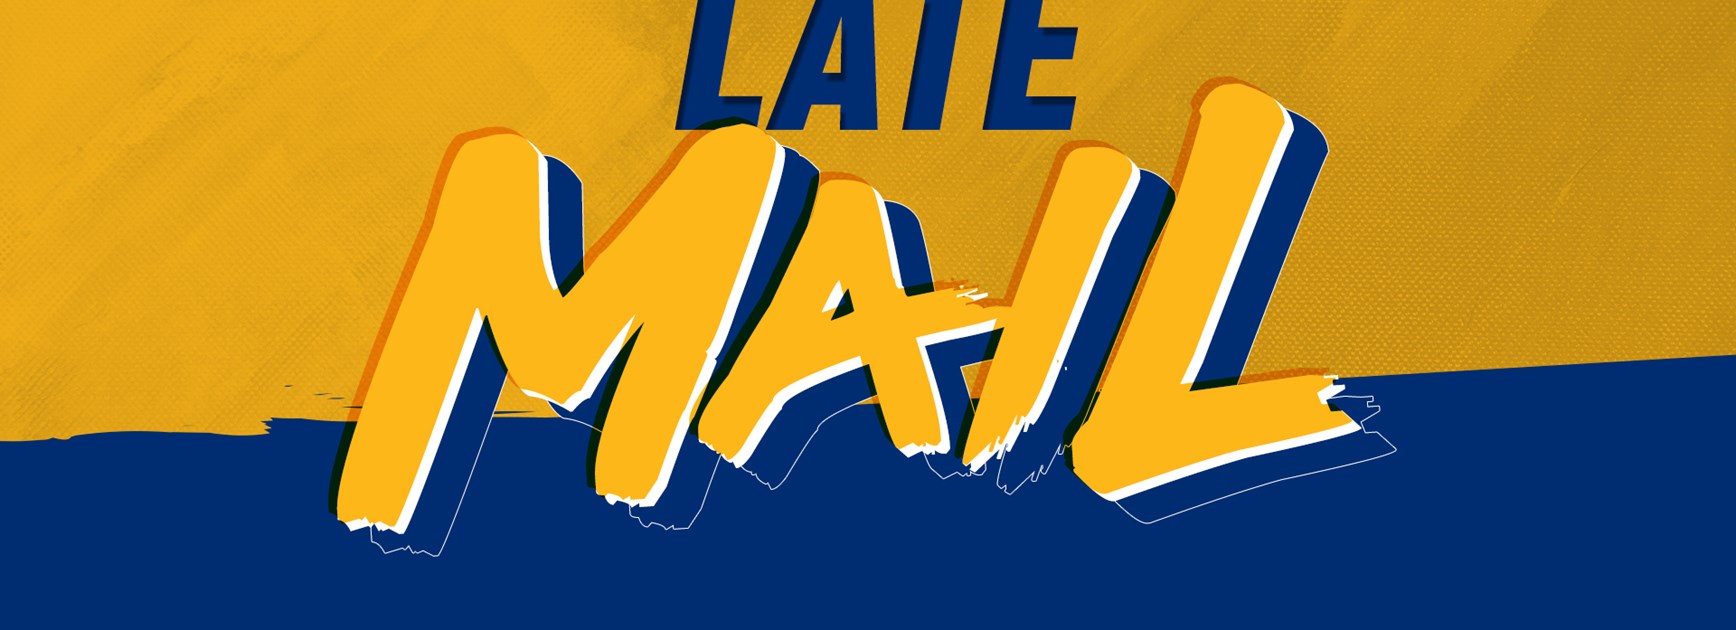 Eels v Warriors Late Mail